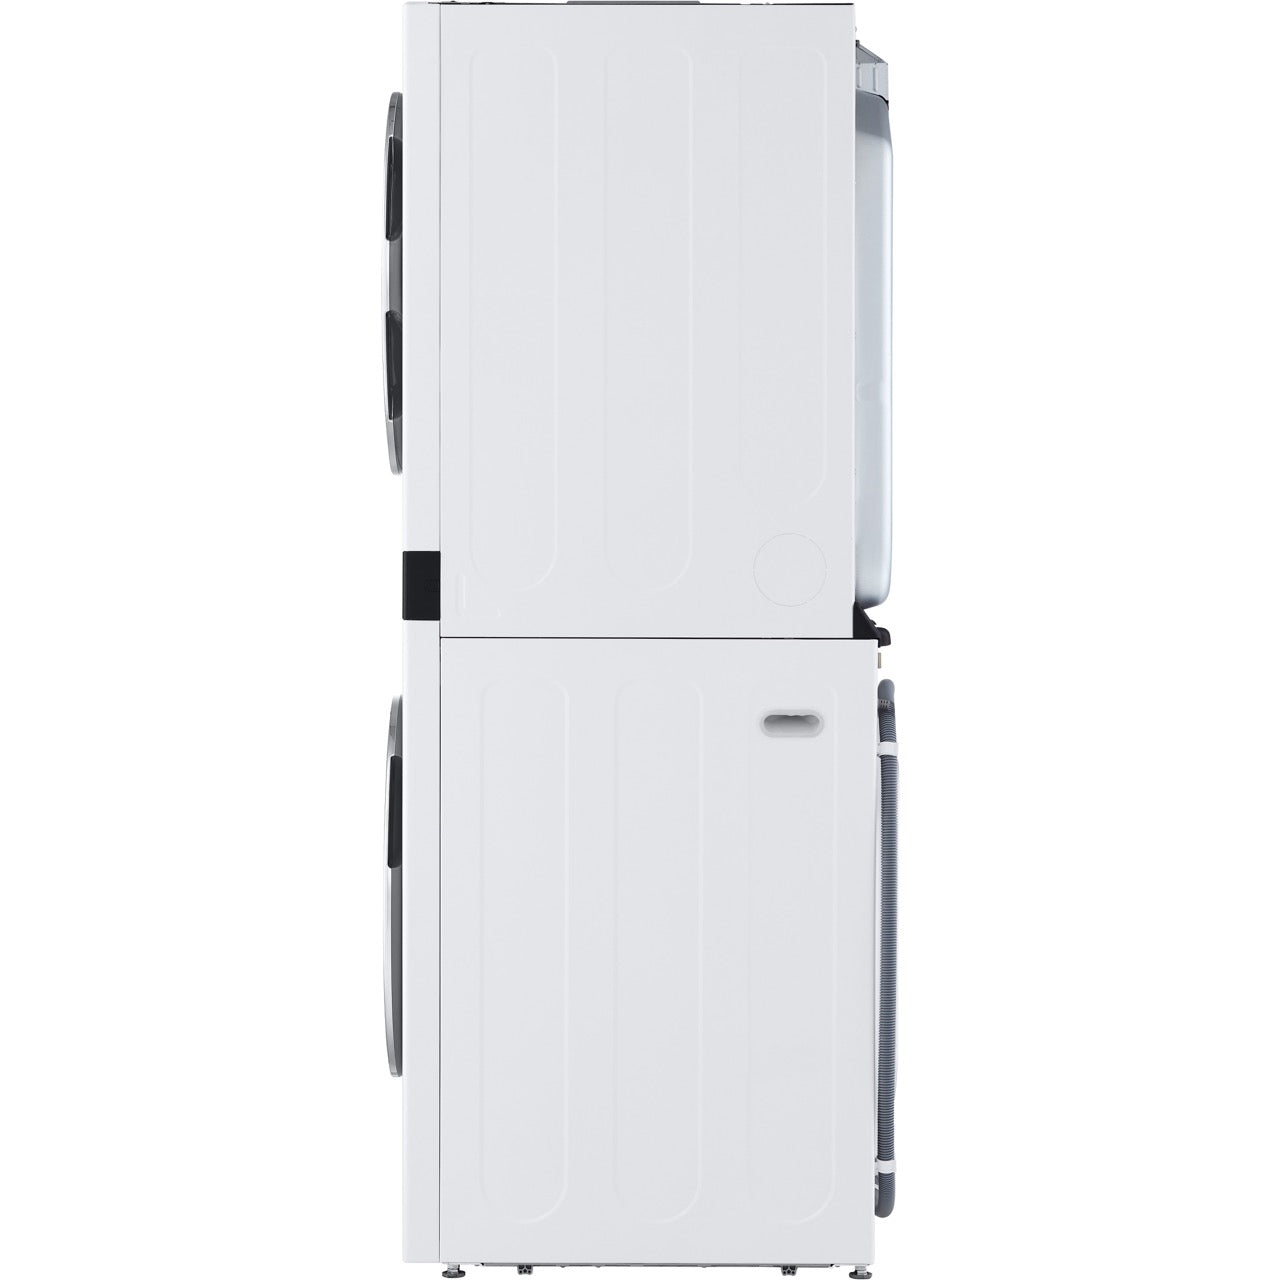 LG Single Unit Electric WashTower with Center Control In White (WKEX200HWA)